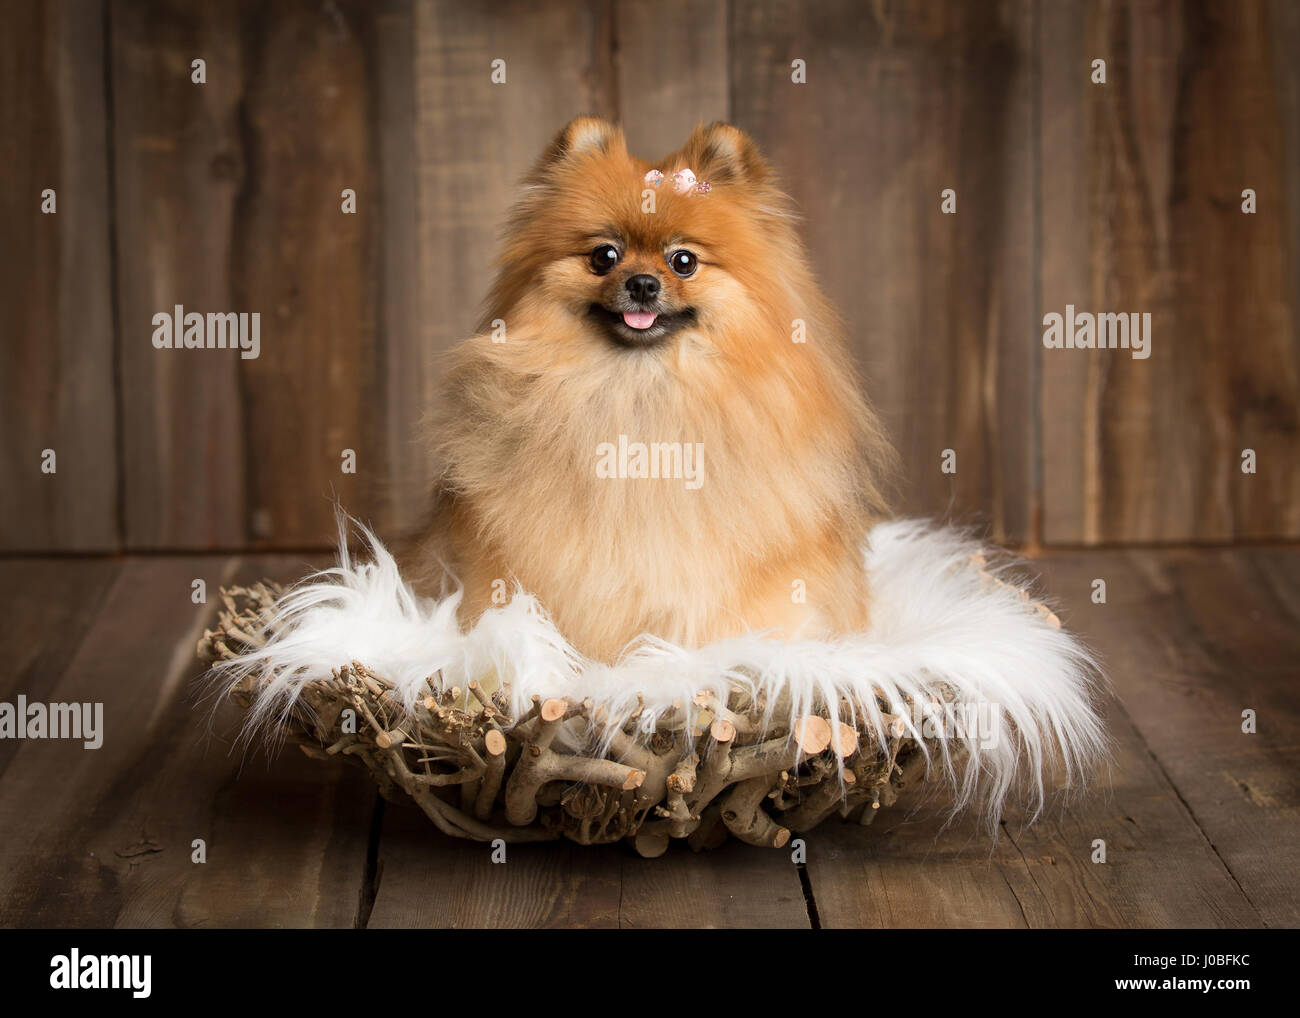 PAMPERED pooches have been hilariously captured for their PAW-traits by a British photographer who normally shoots images in this style for newborn babies. The cute images show the puppies enjoying their photoshoot in a variety of poses including squeezing themselves into a series of small baskets and lounging on couches for the ultimate cute-effect. The pictures were taken by London photographer Sandi Ford (37) who has since relocated to America to hone her talent. Sandi explained that she shot the photos in this style to show how these mutts are treated like human babies by their doting owne Stock Photo